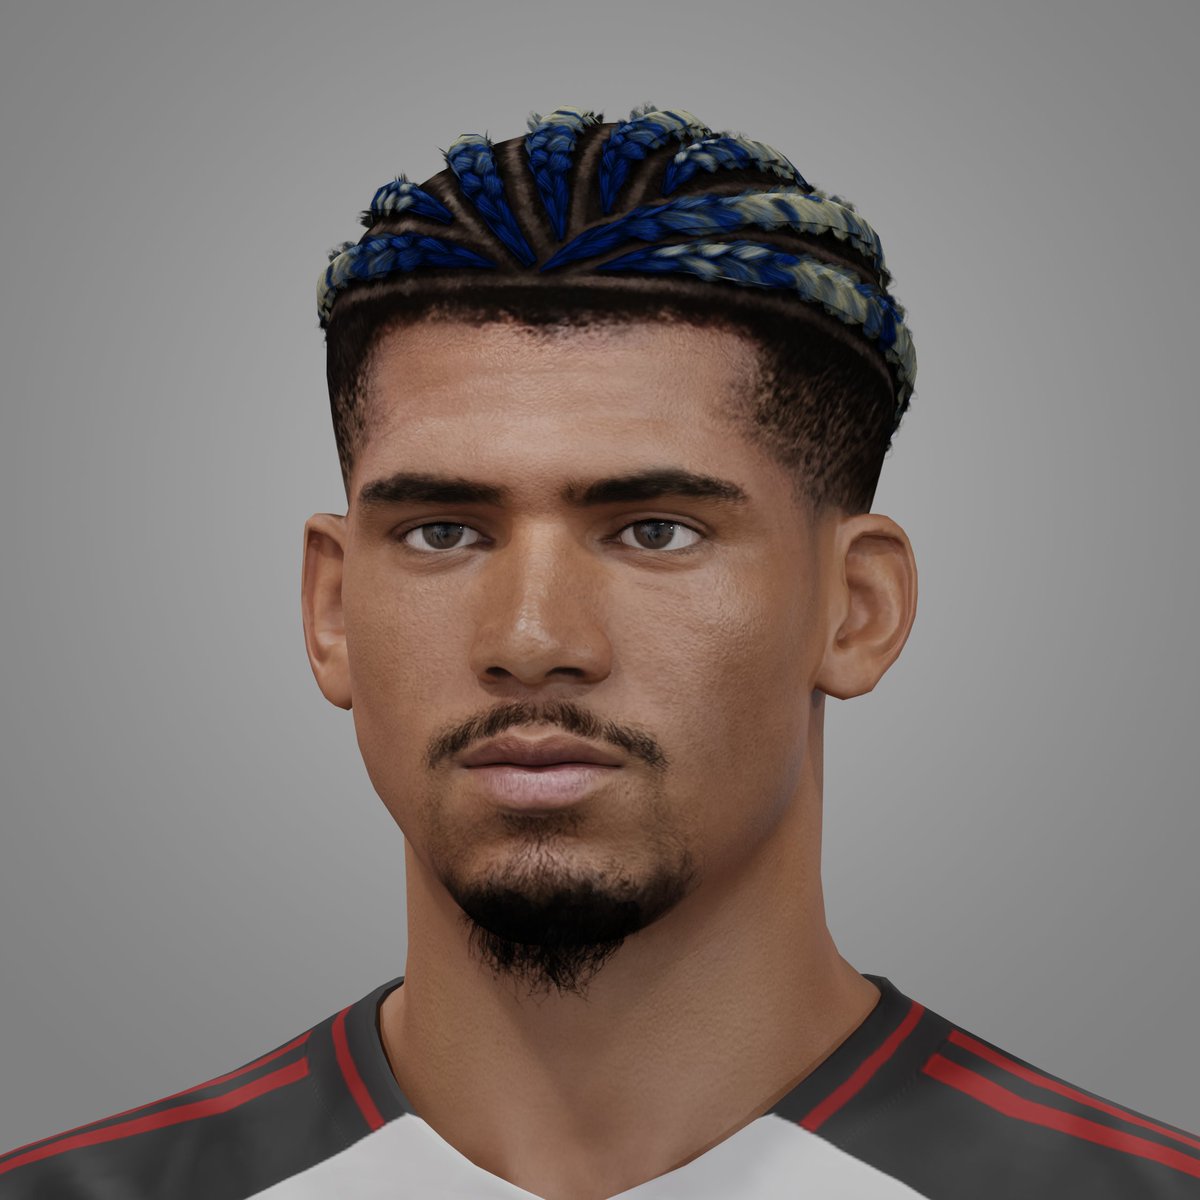 Ronald Araujo | RENDER PREVIEW

📇 Contact me for personal face or request!

#nerwin64 #fifa23 #fc24 #fifafaces #fifaMods #nextgen